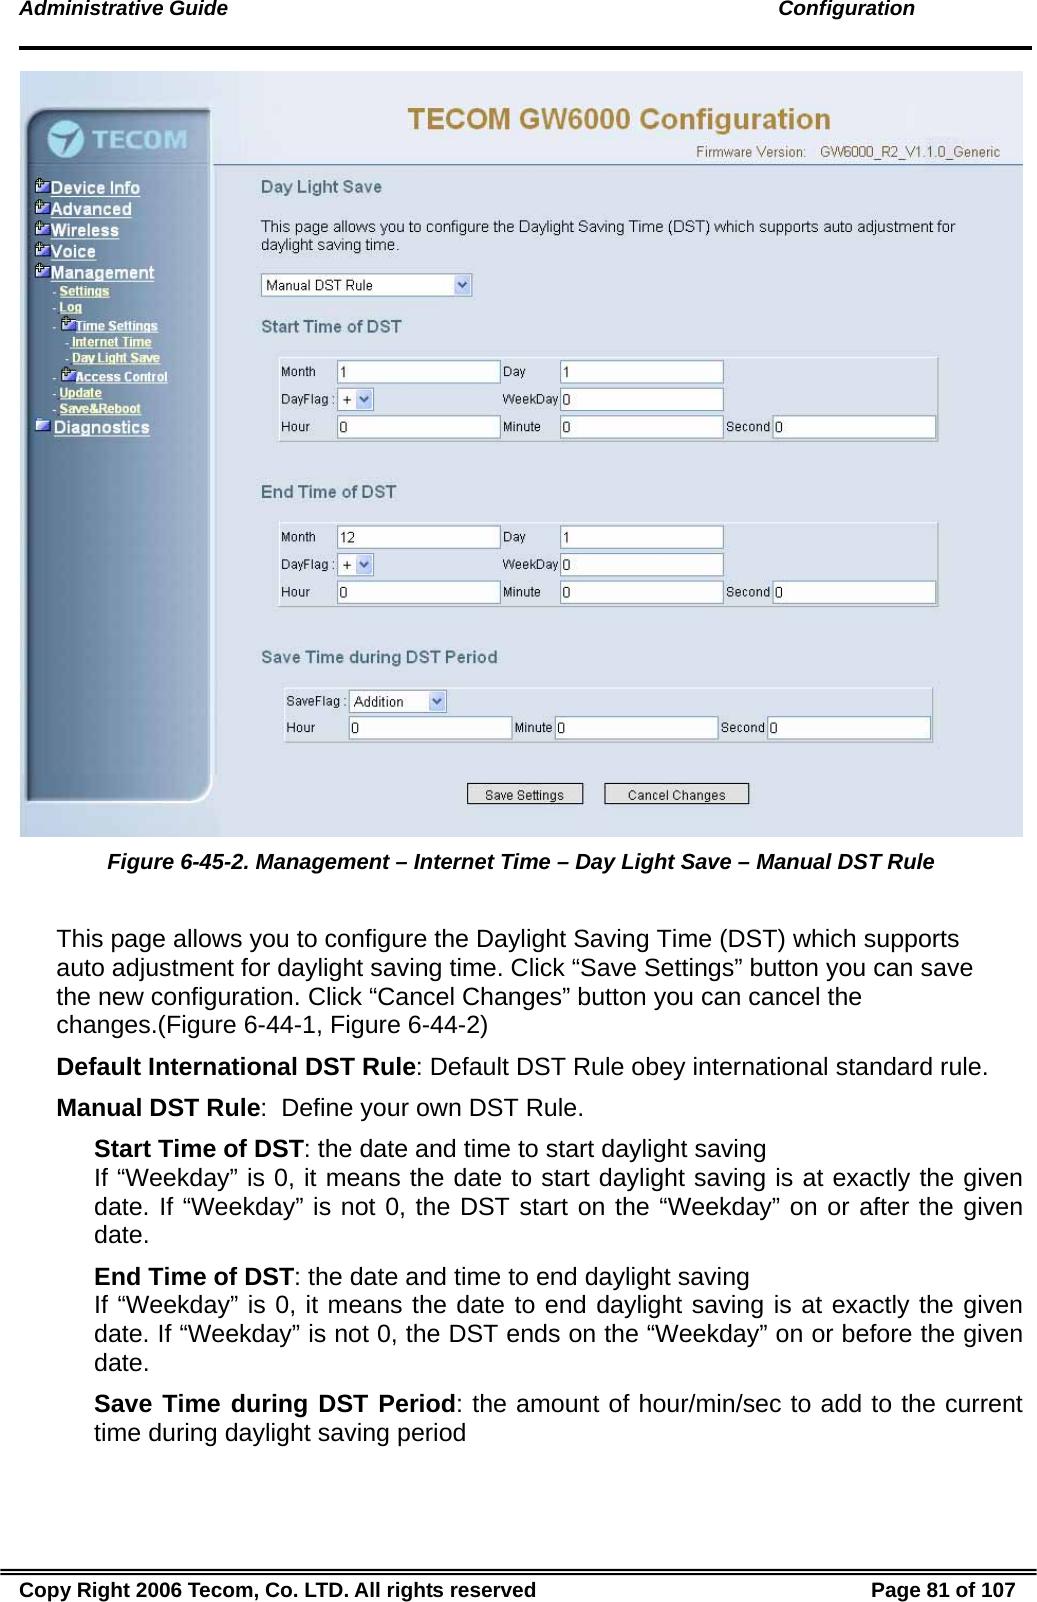 Administrative Guide                                                                                               Configuration  Figure 6-45-2. Management – Internet Time – Day Light Save – Manual DST Rule  This page allows you to configure the Daylight Saving Time (DST) which supports auto adjustment for daylight saving time. Click “Save Settings” button you can save the new configuration. Click “Cancel Changes” button you can cancel the changes.(Figure 6-44-1, Figure 6-44-2) Default International DST Rule: Default DST Rule obey international standard rule. Manual DST Rule:  Define your own DST Rule. Start Time of DST: the date and time to start daylight saving If “Weekday” is 0, it means the date to start daylight saving is at exactly the given date. If “Weekday” is not 0, the DST start on the “Weekday” on or after the given date. End Time of DST: the date and time to end daylight saving If “Weekday” is 0, it means the date to end daylight saving is at exactly the given date. If “Weekday” is not 0, the DST ends on the “Weekday” on or before the given date. Save Time during DST Period: the amount of hour/min/sec to add to the current time during daylight saving period Copy Right 2006 Tecom, Co. LTD. All rights reserved  Page 81 of 107 